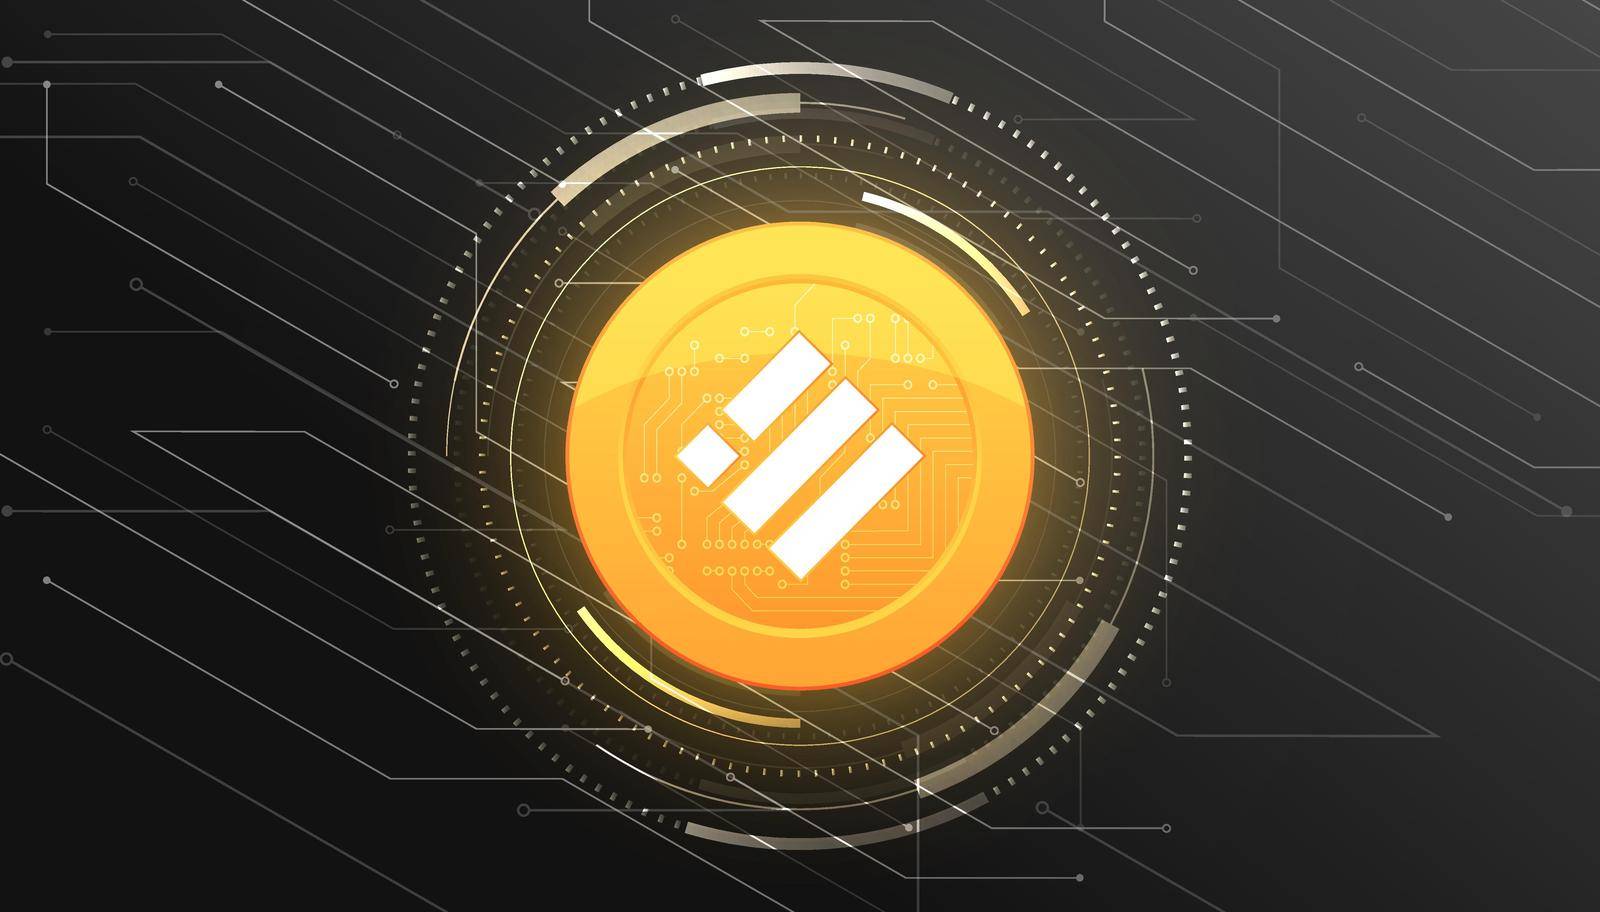 Binance USD (BUSD) crypto currency themed banner. Binance USD coin or BUSD icon on modern black color background.